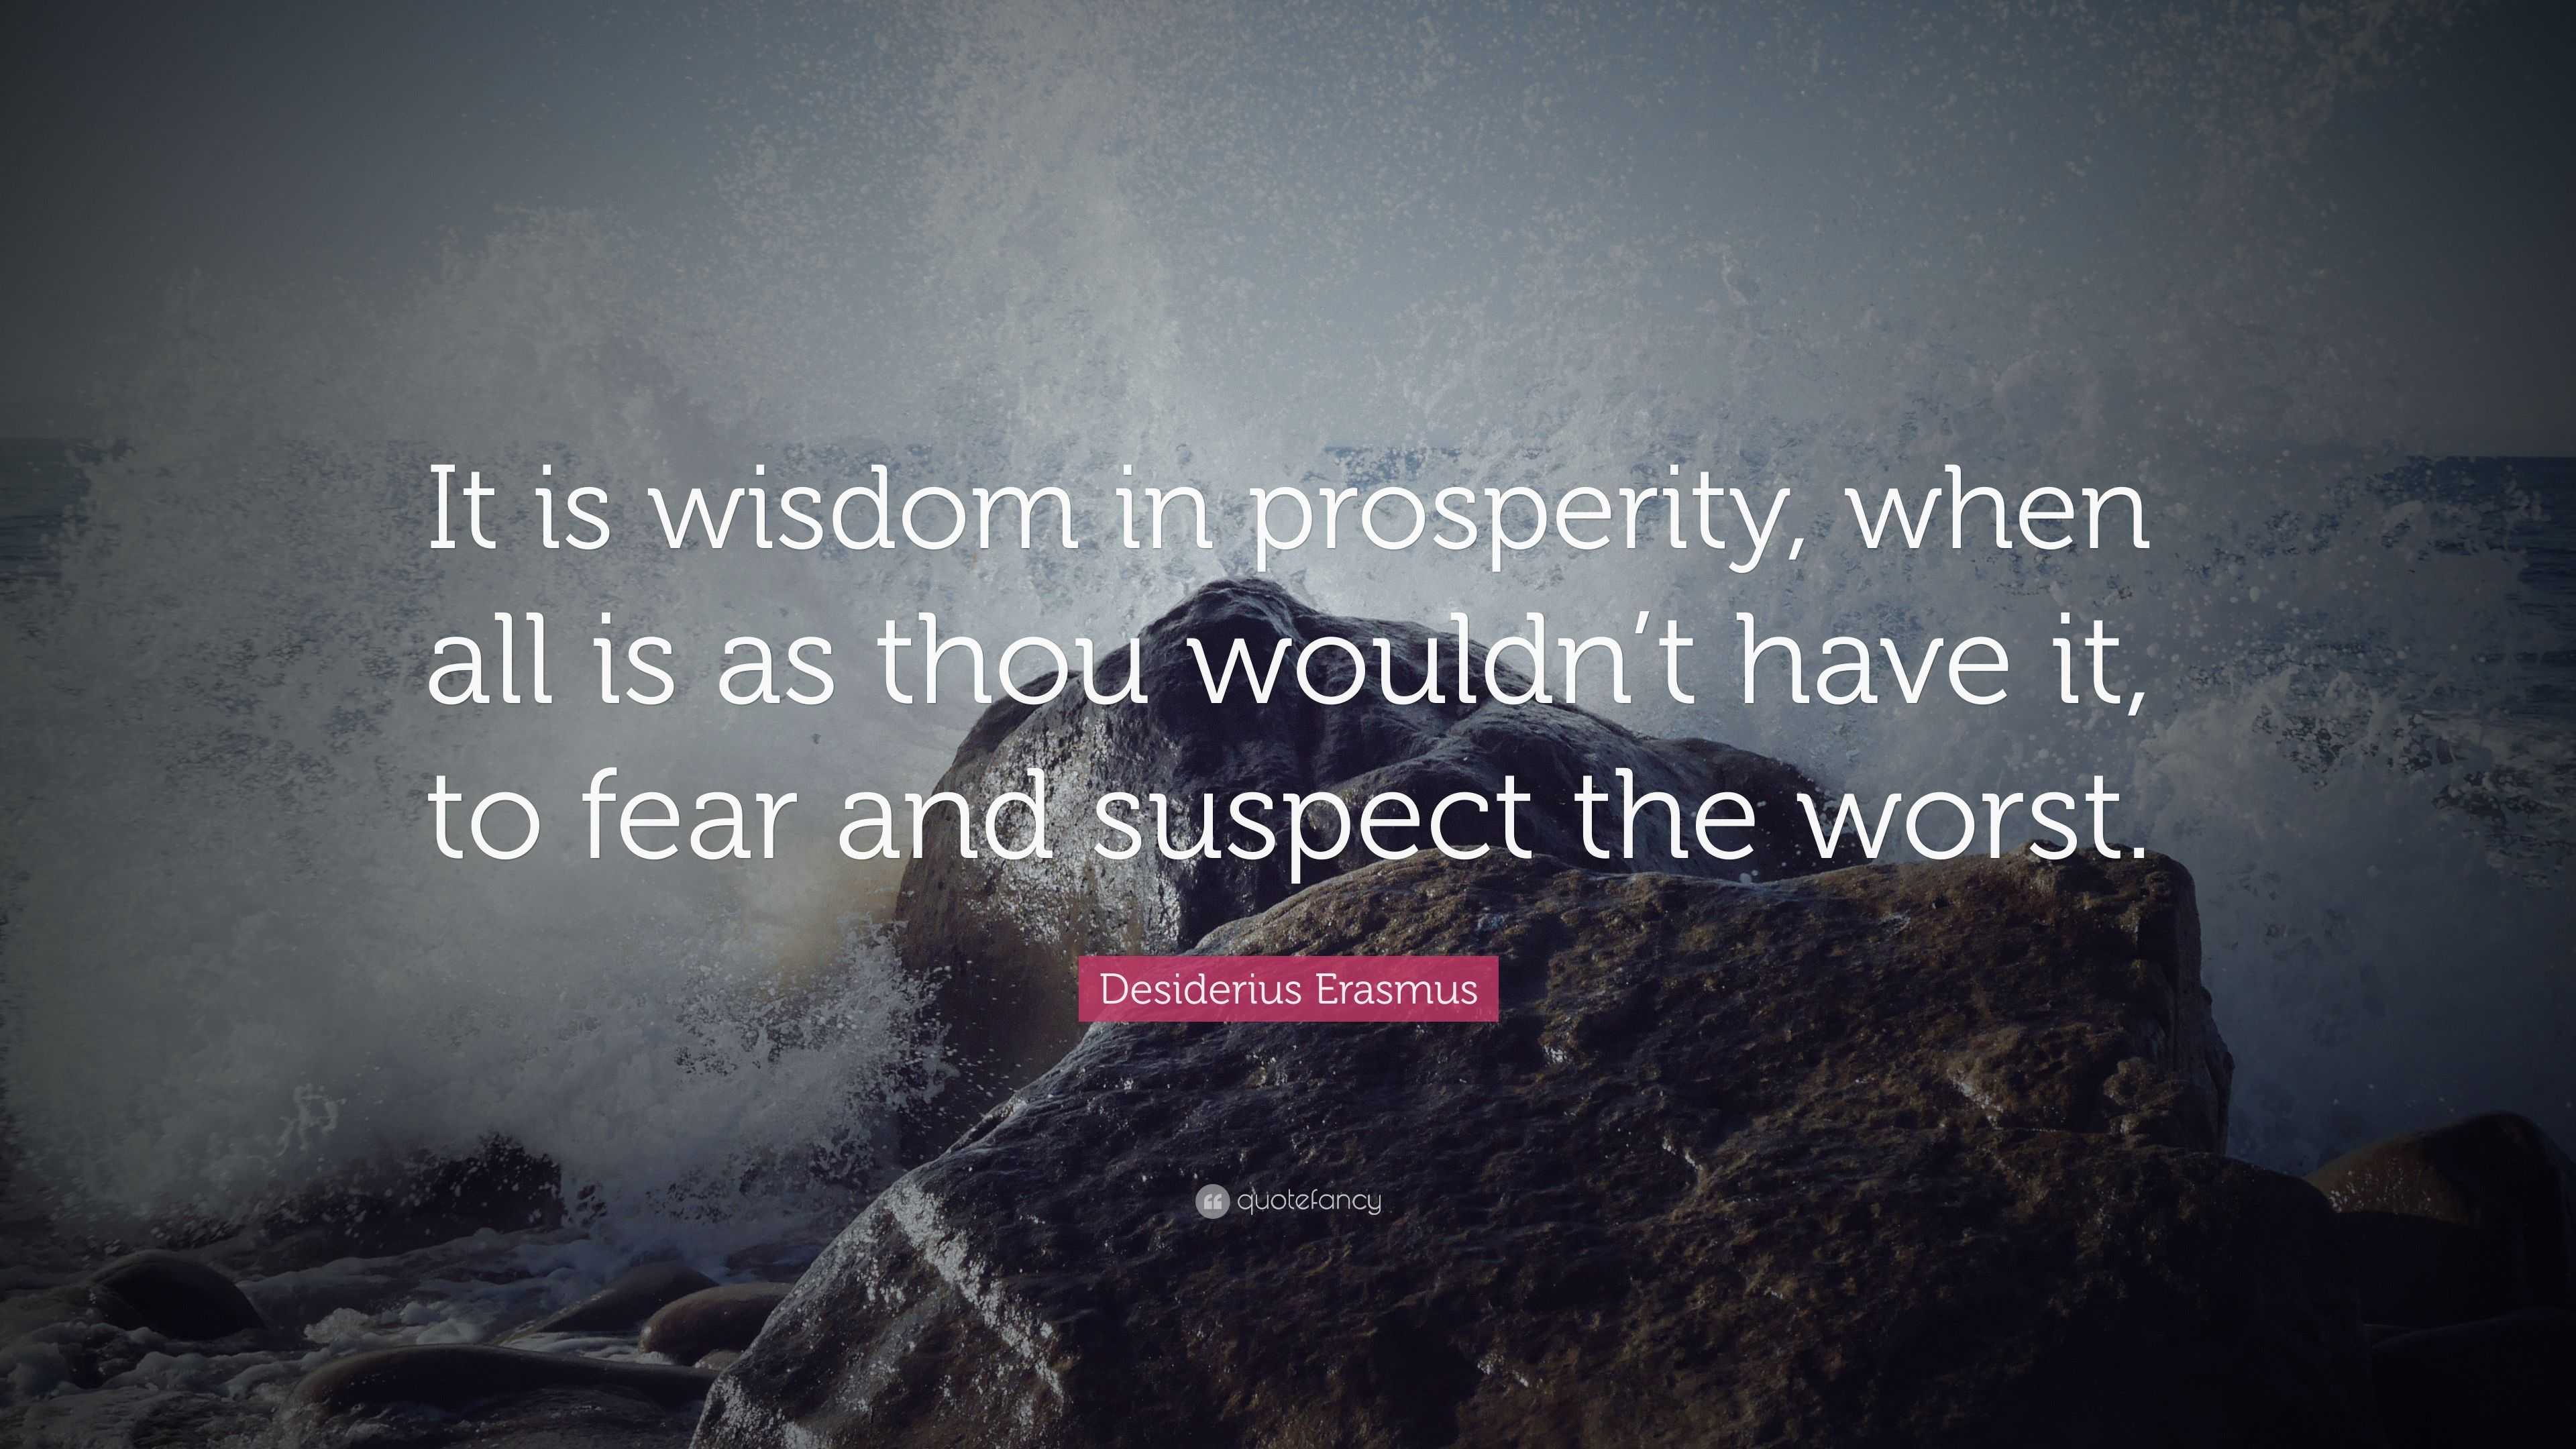 Desiderius Erasmus Quote: “It is wisdom in prosperity, when all is as ...